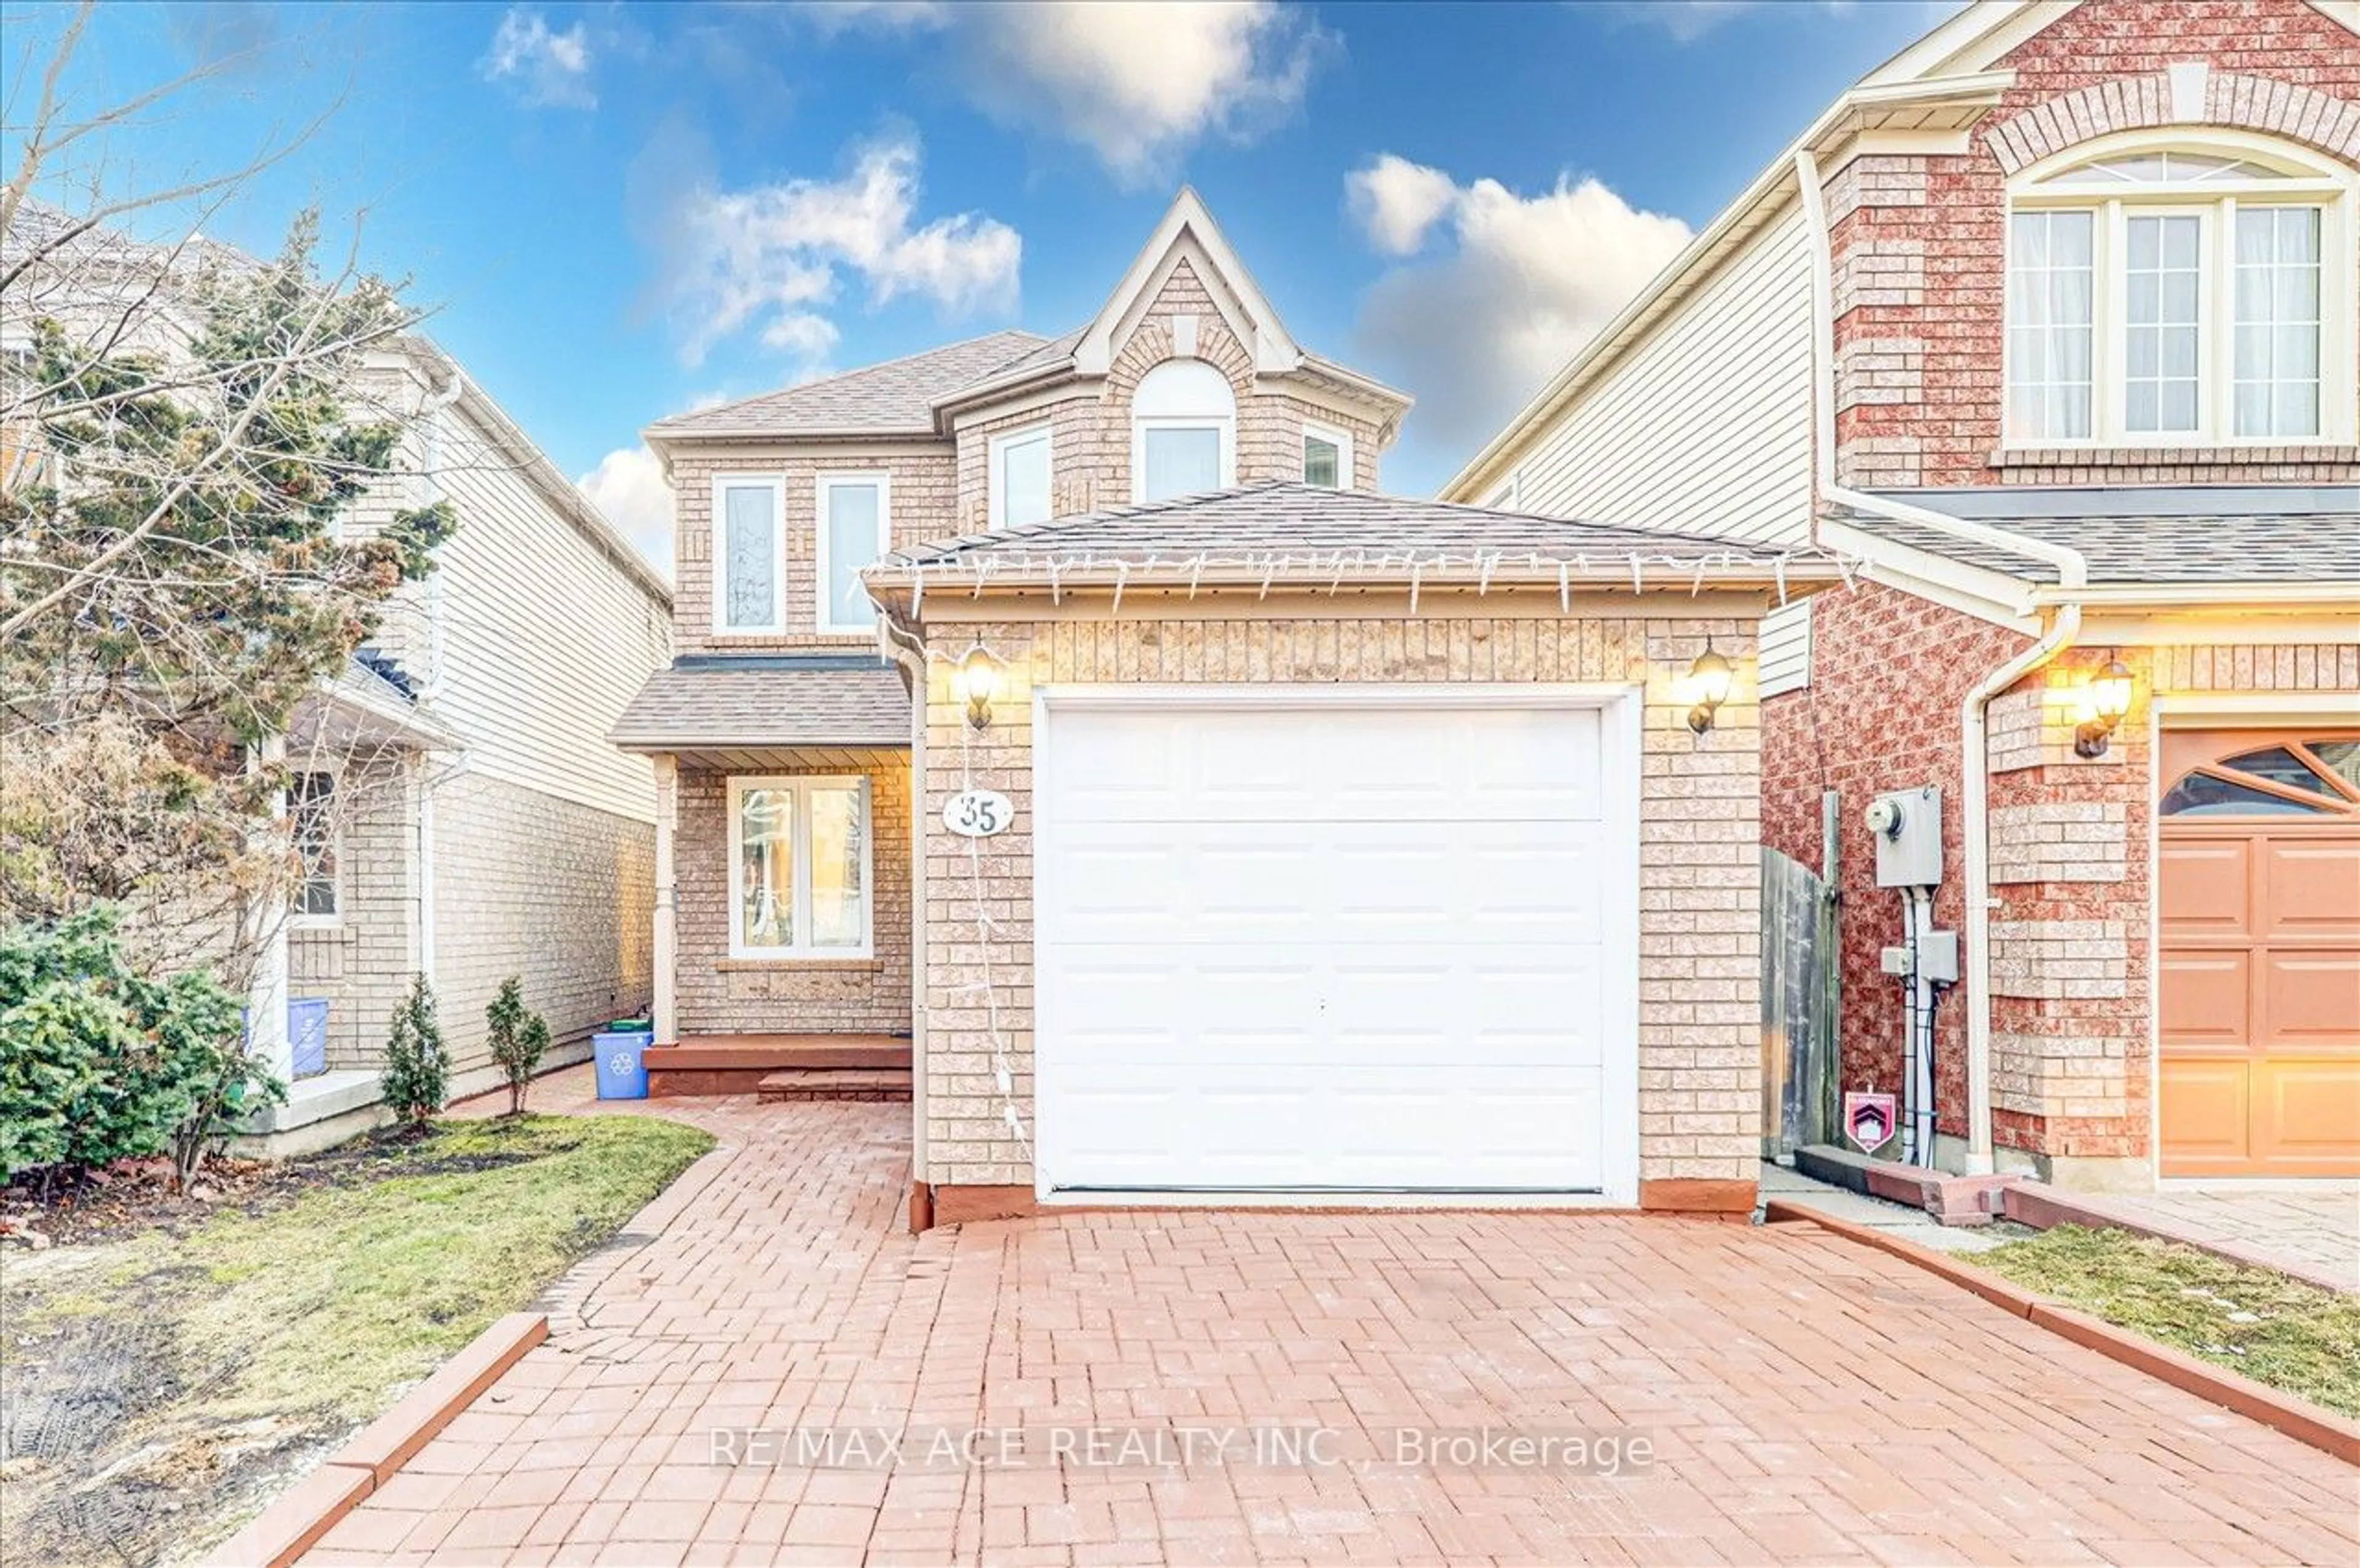 Home with brick exterior material for 35 Lax Ave, Ajax Ontario L1Z 1G7